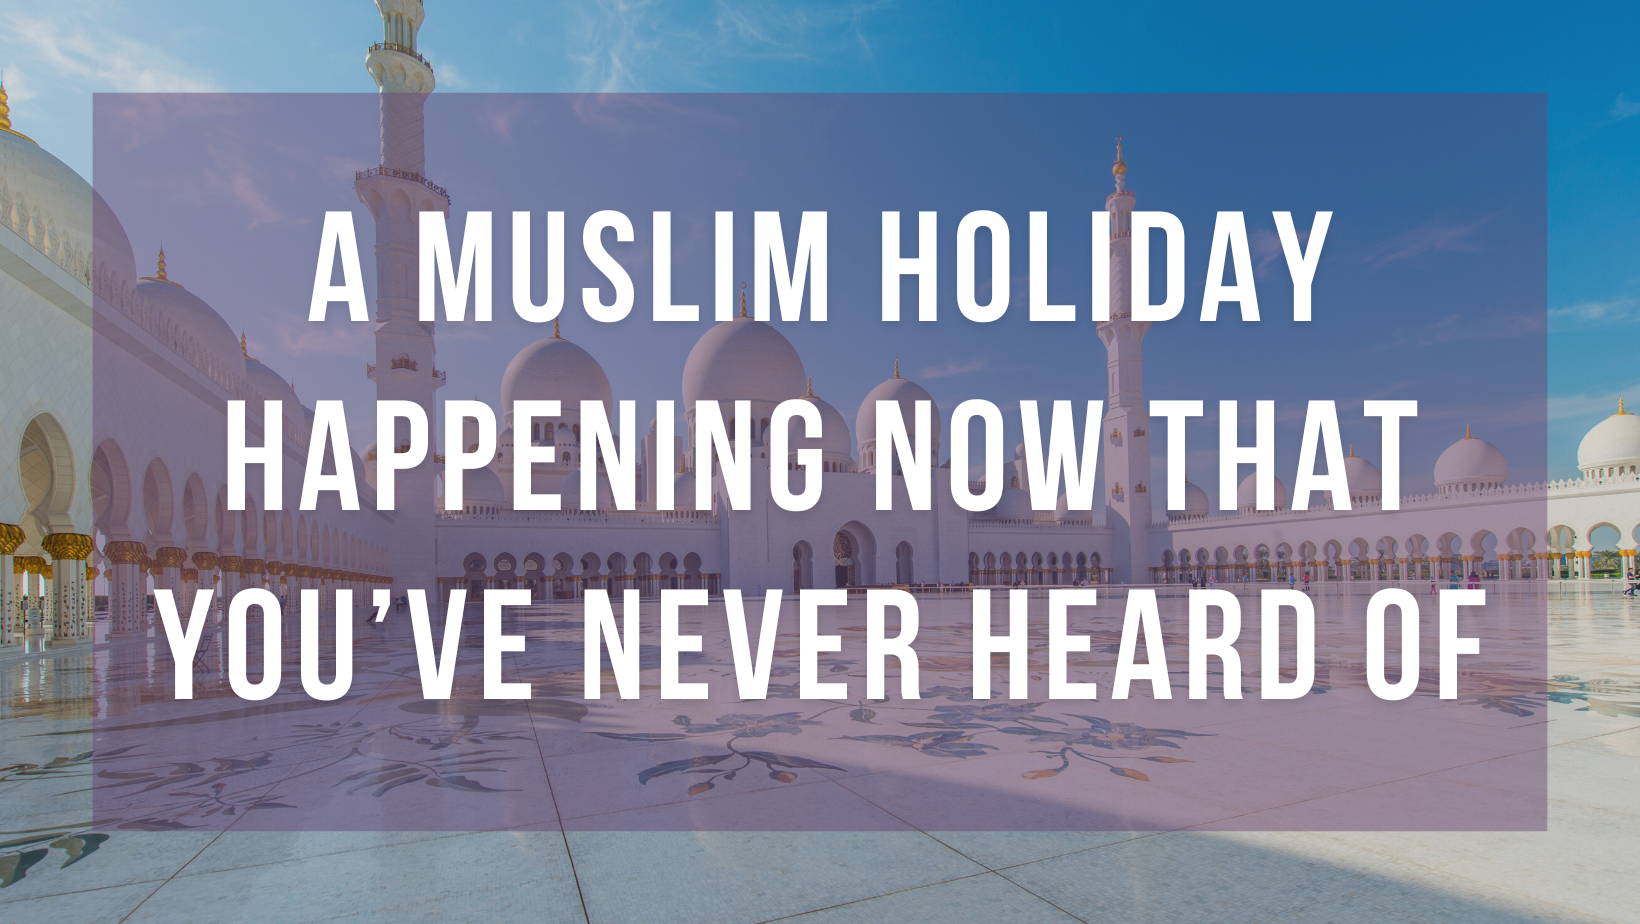 A Muslim holiday happening now that you’ve never heard of